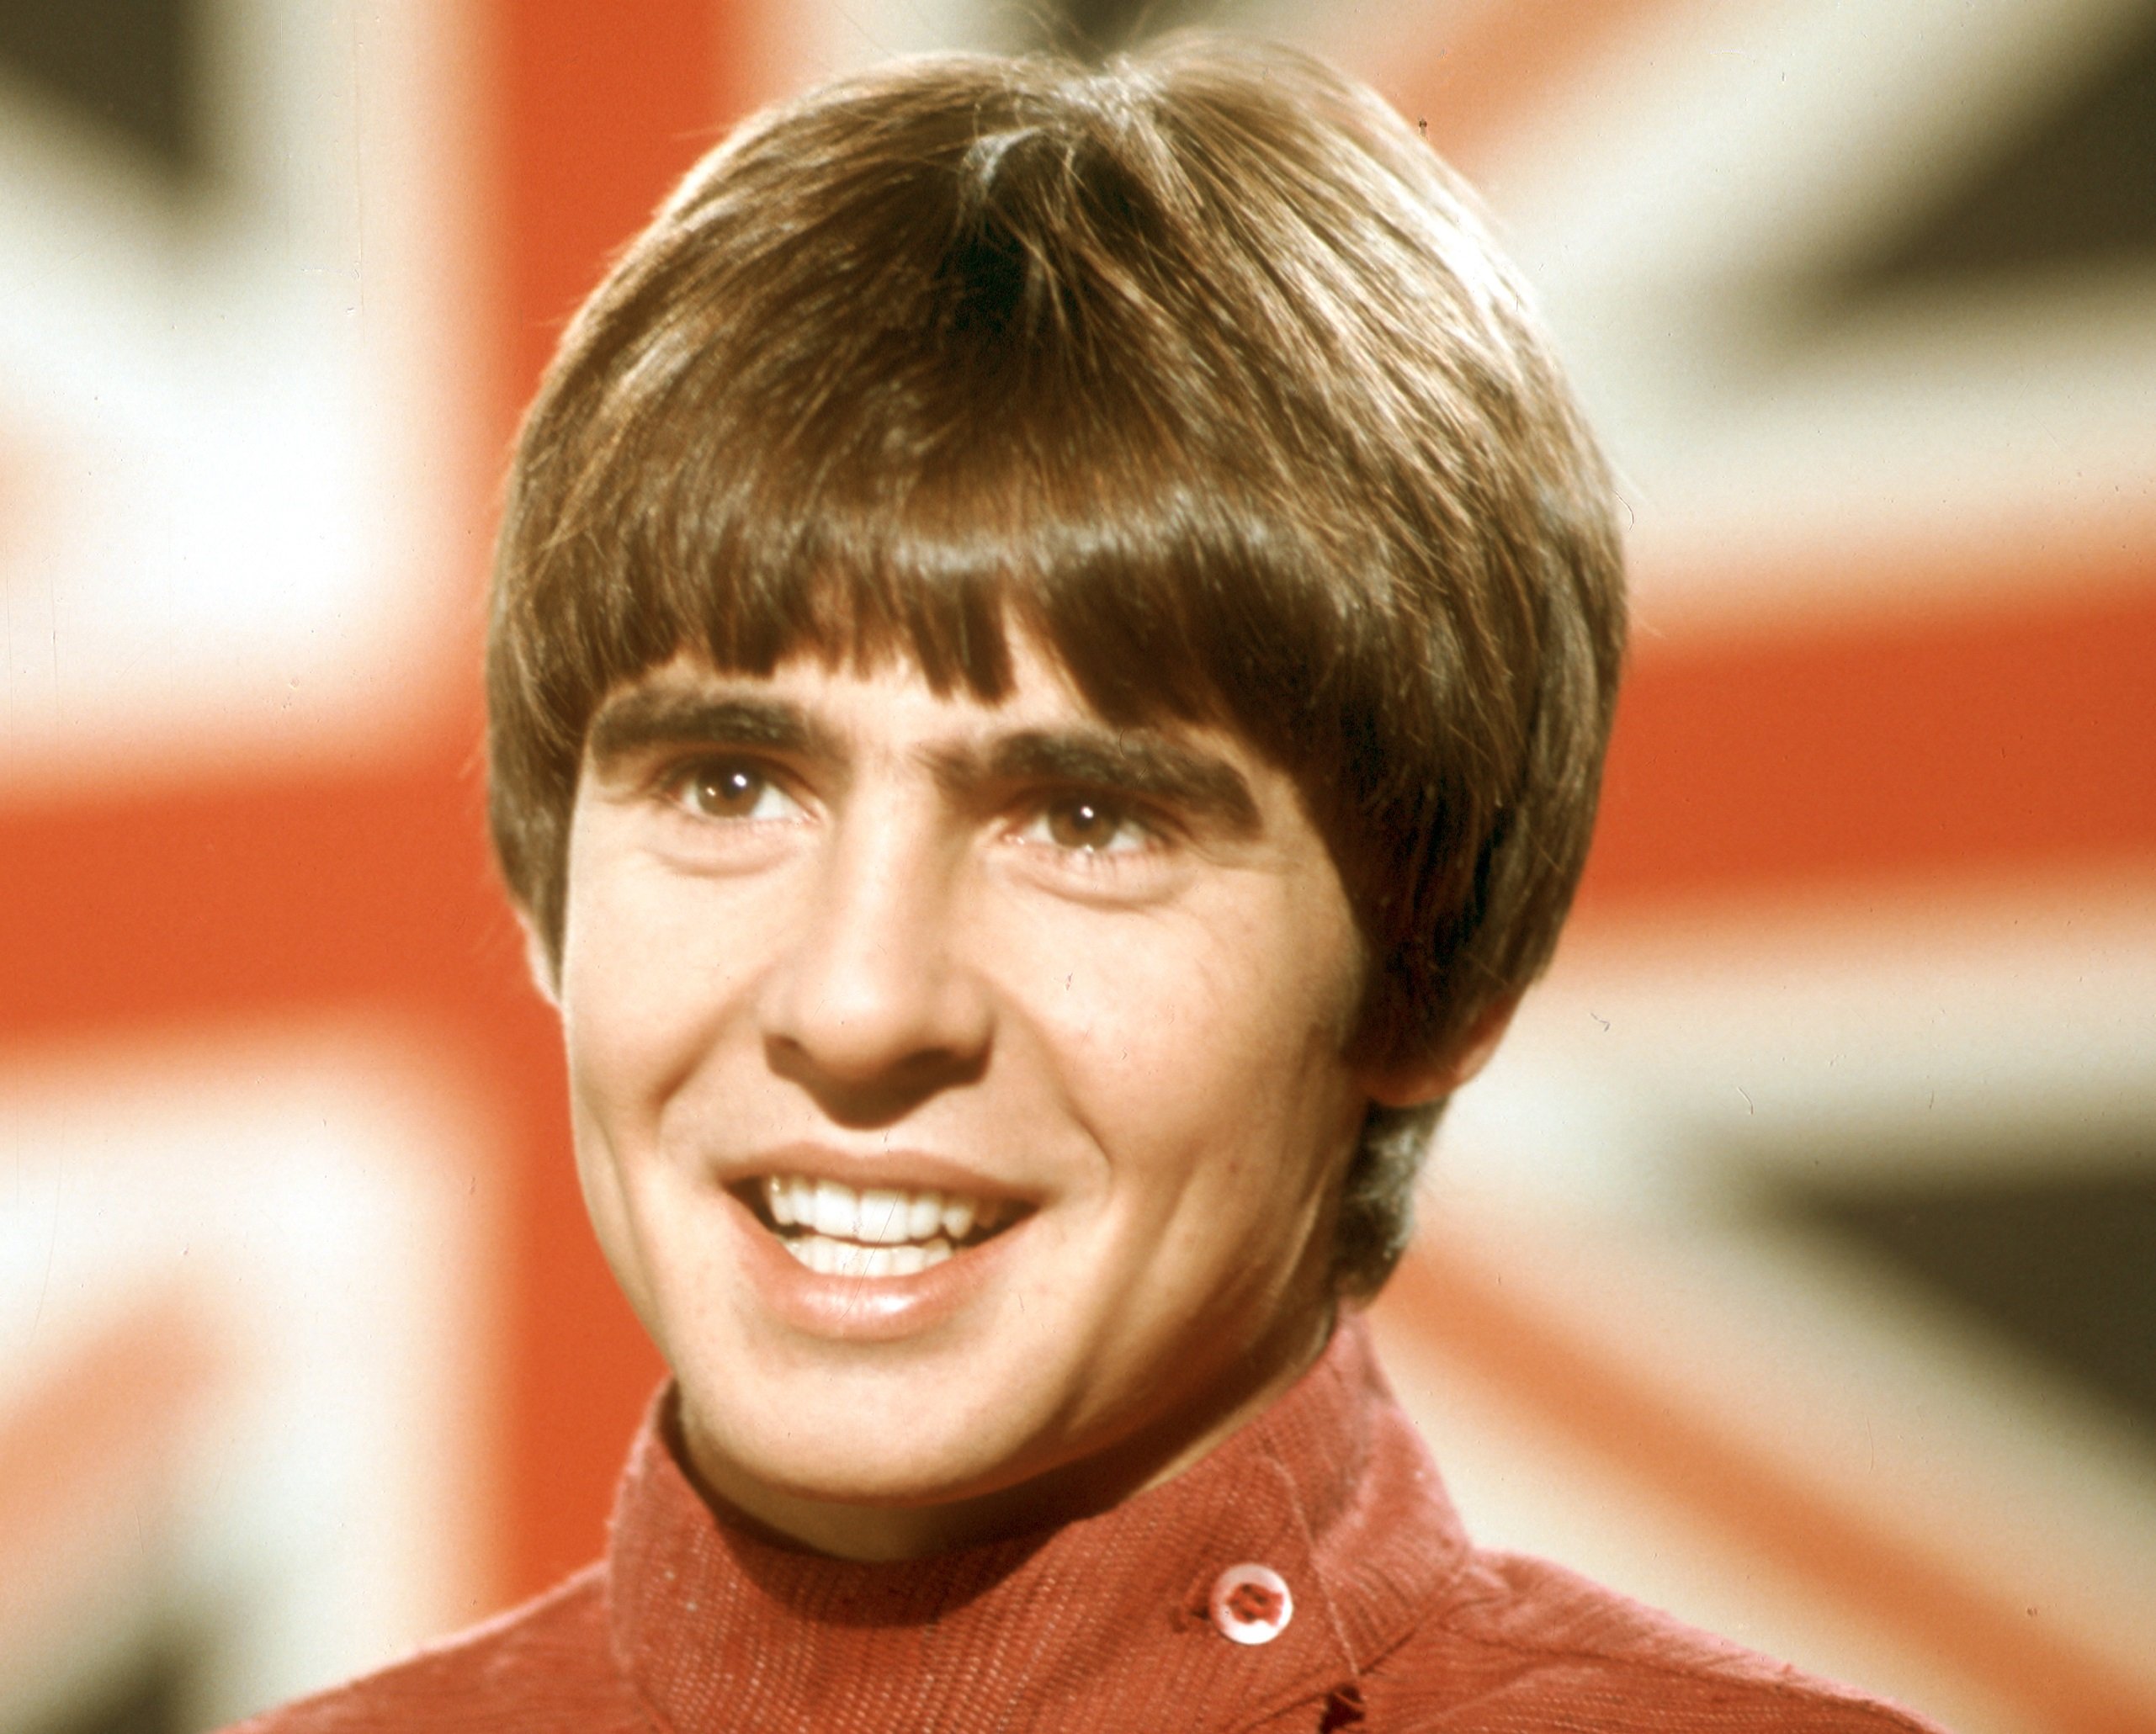 The Monkees' Davy Jones in front of the flag of the United Kingdom